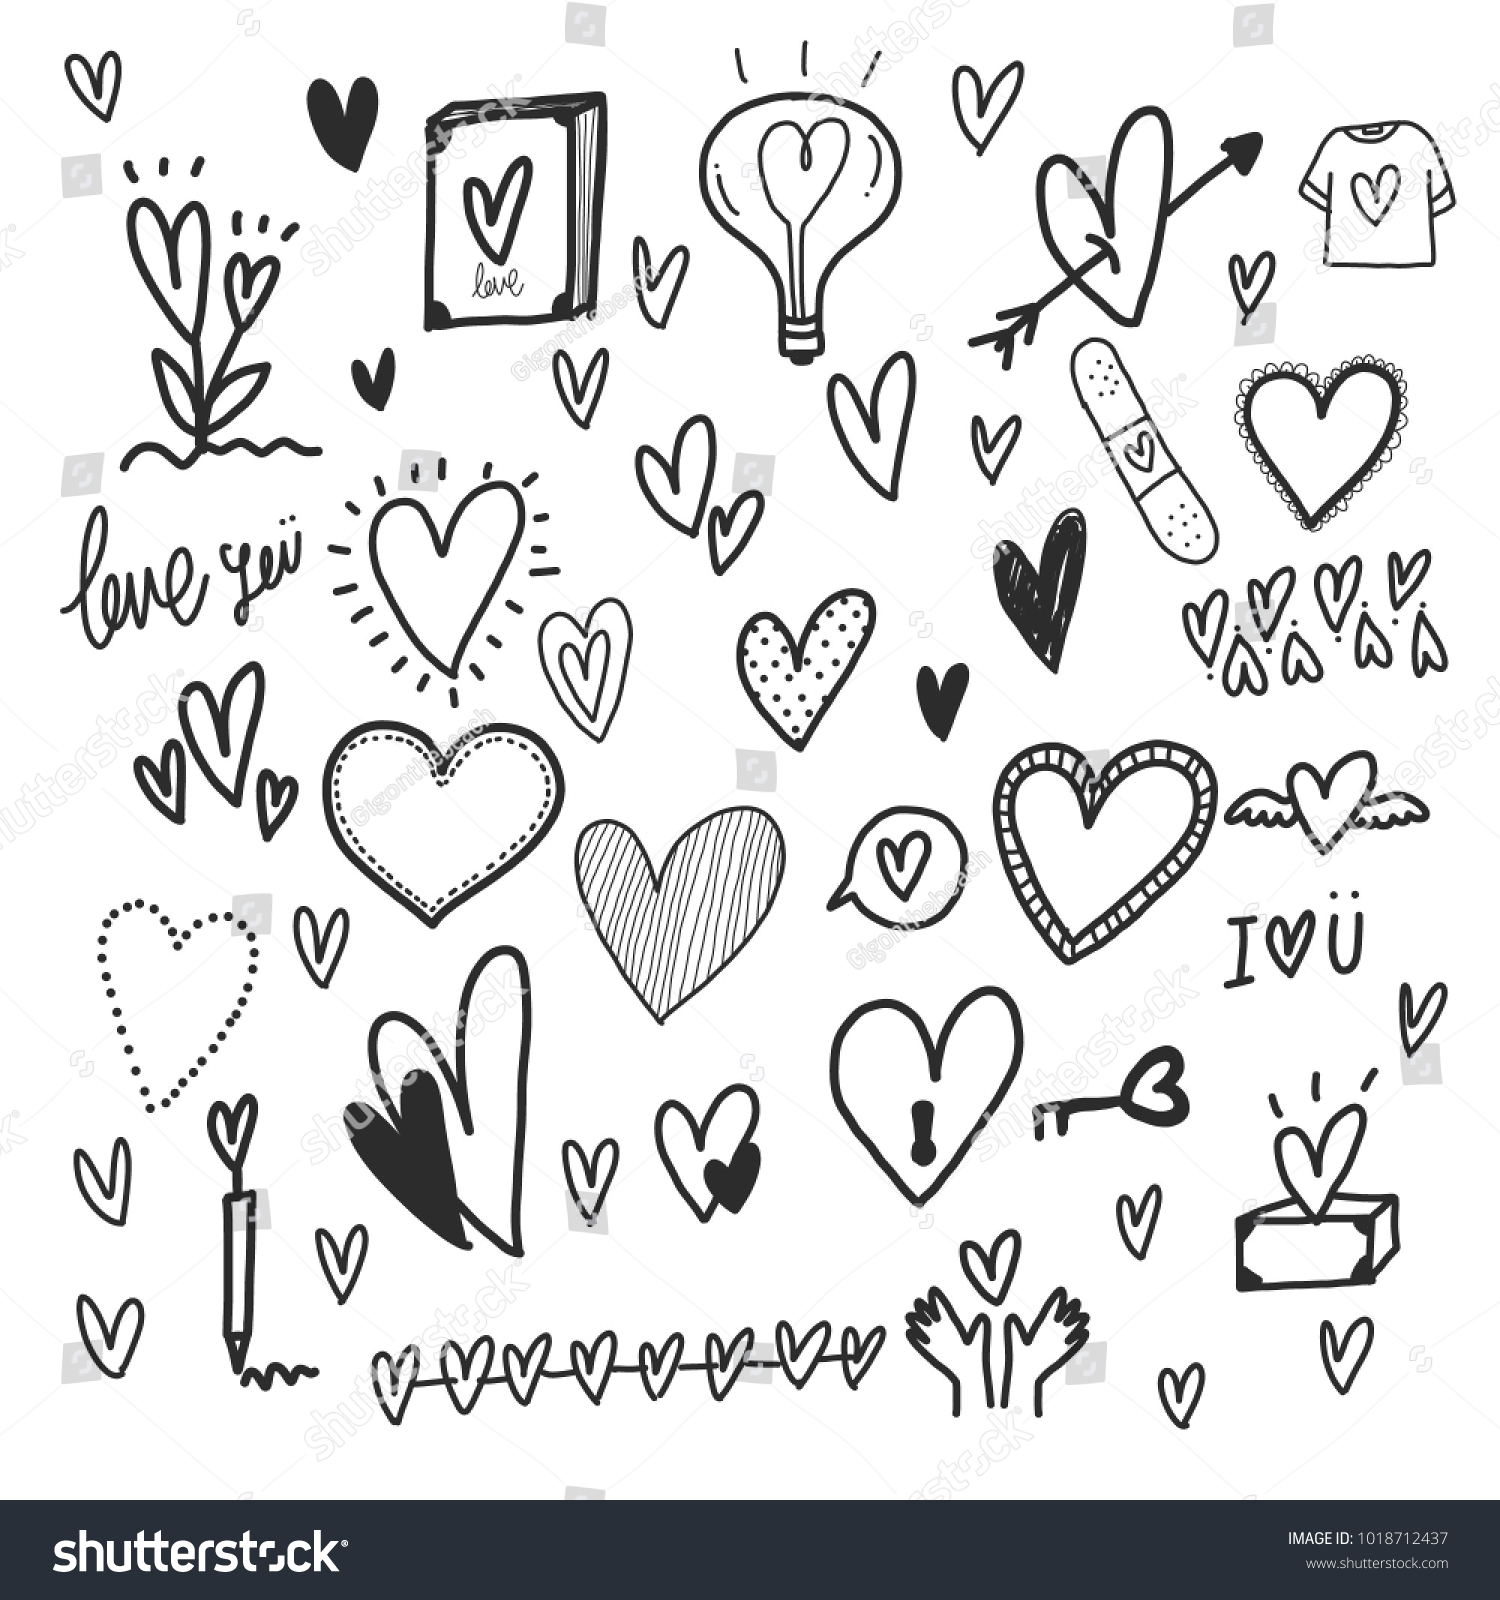 Heart Hand Draw Doodle Concept Vector Stock Vector (Royalty Free ...